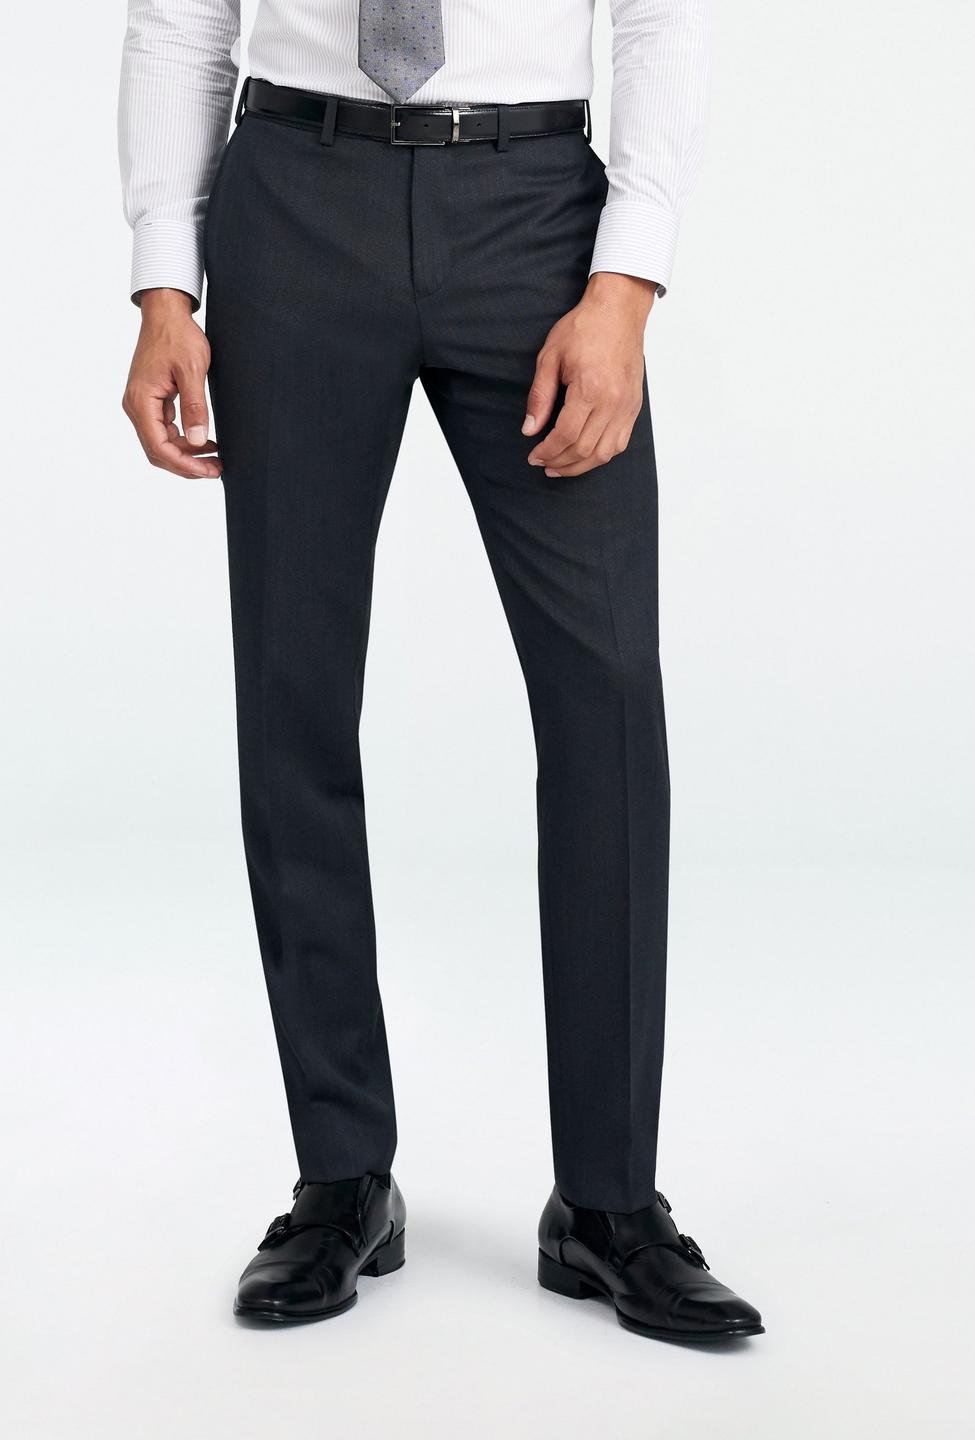 Gray pants - Hereford Solid Design from Premium Indochino Collection